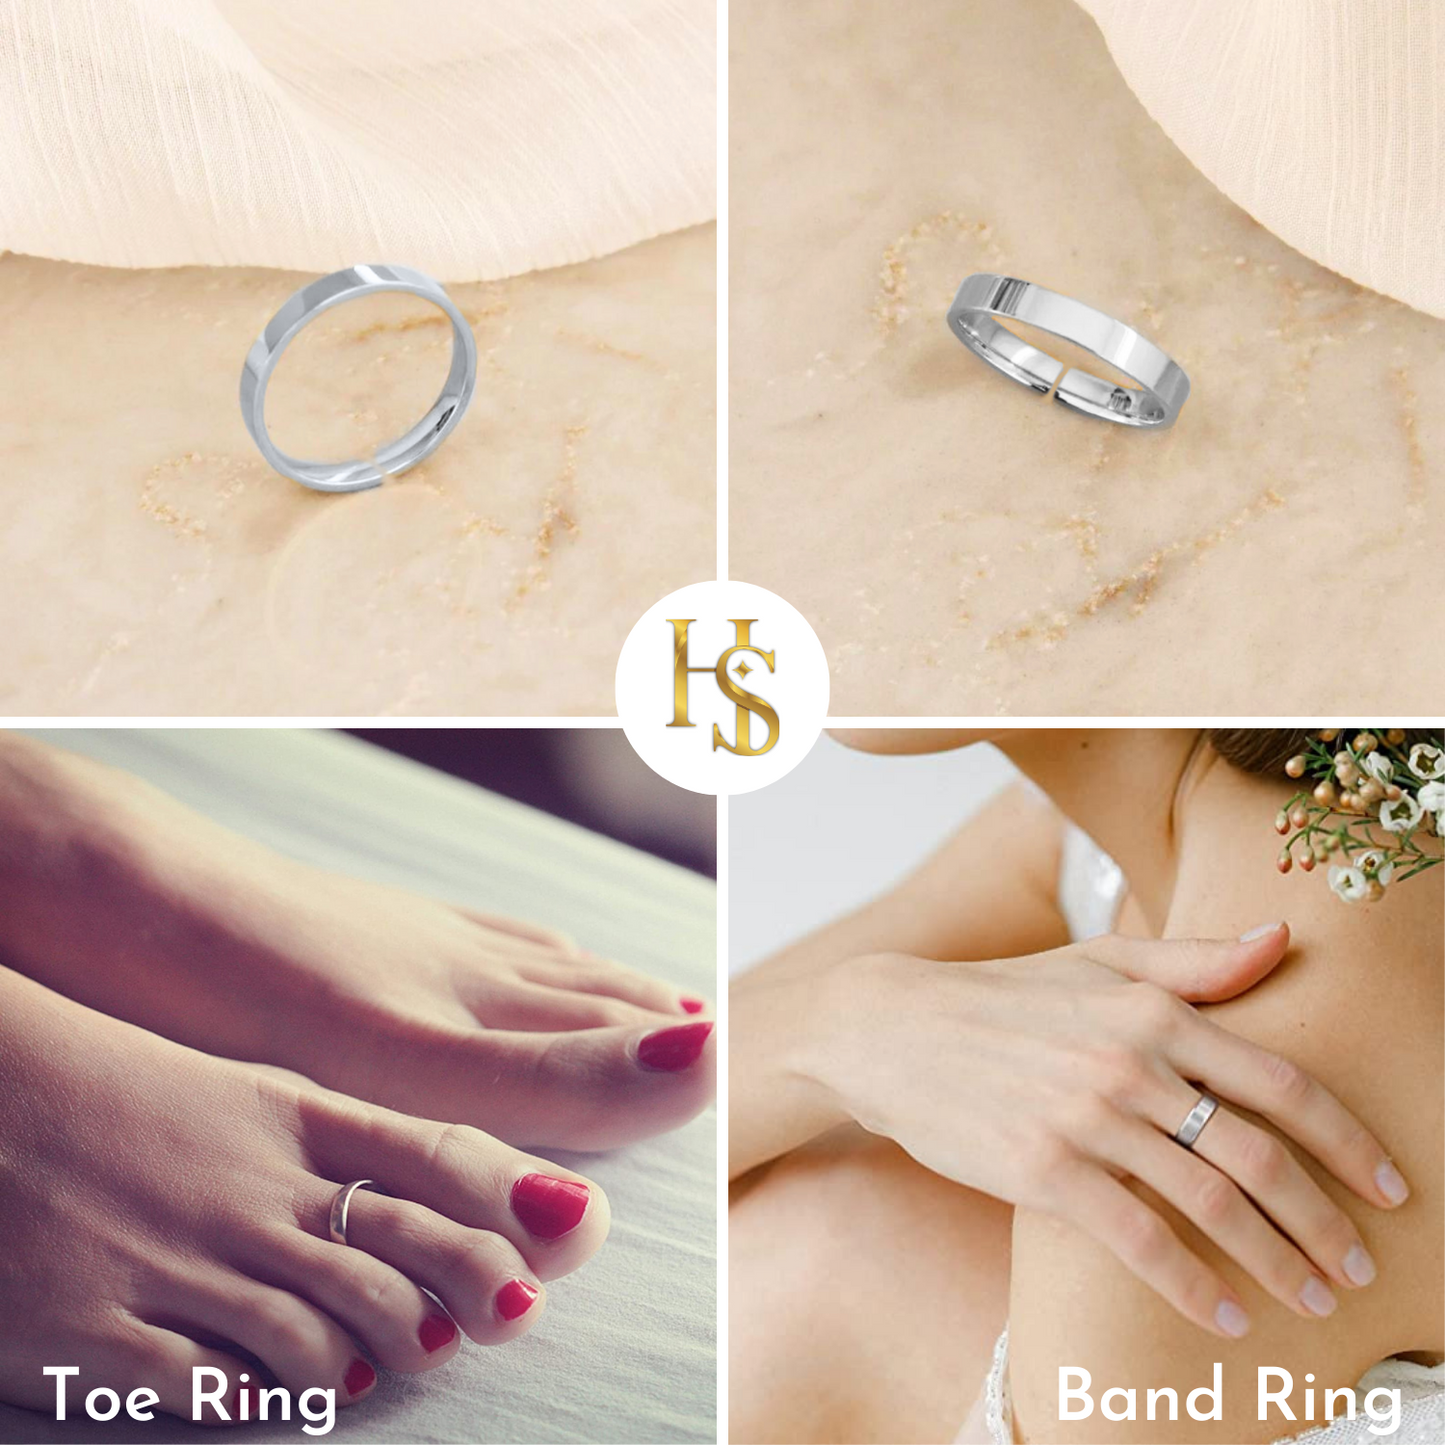 Classic Thick Band Toe Ring - Band Ring - 925 Sterling Silver - 1 Piece